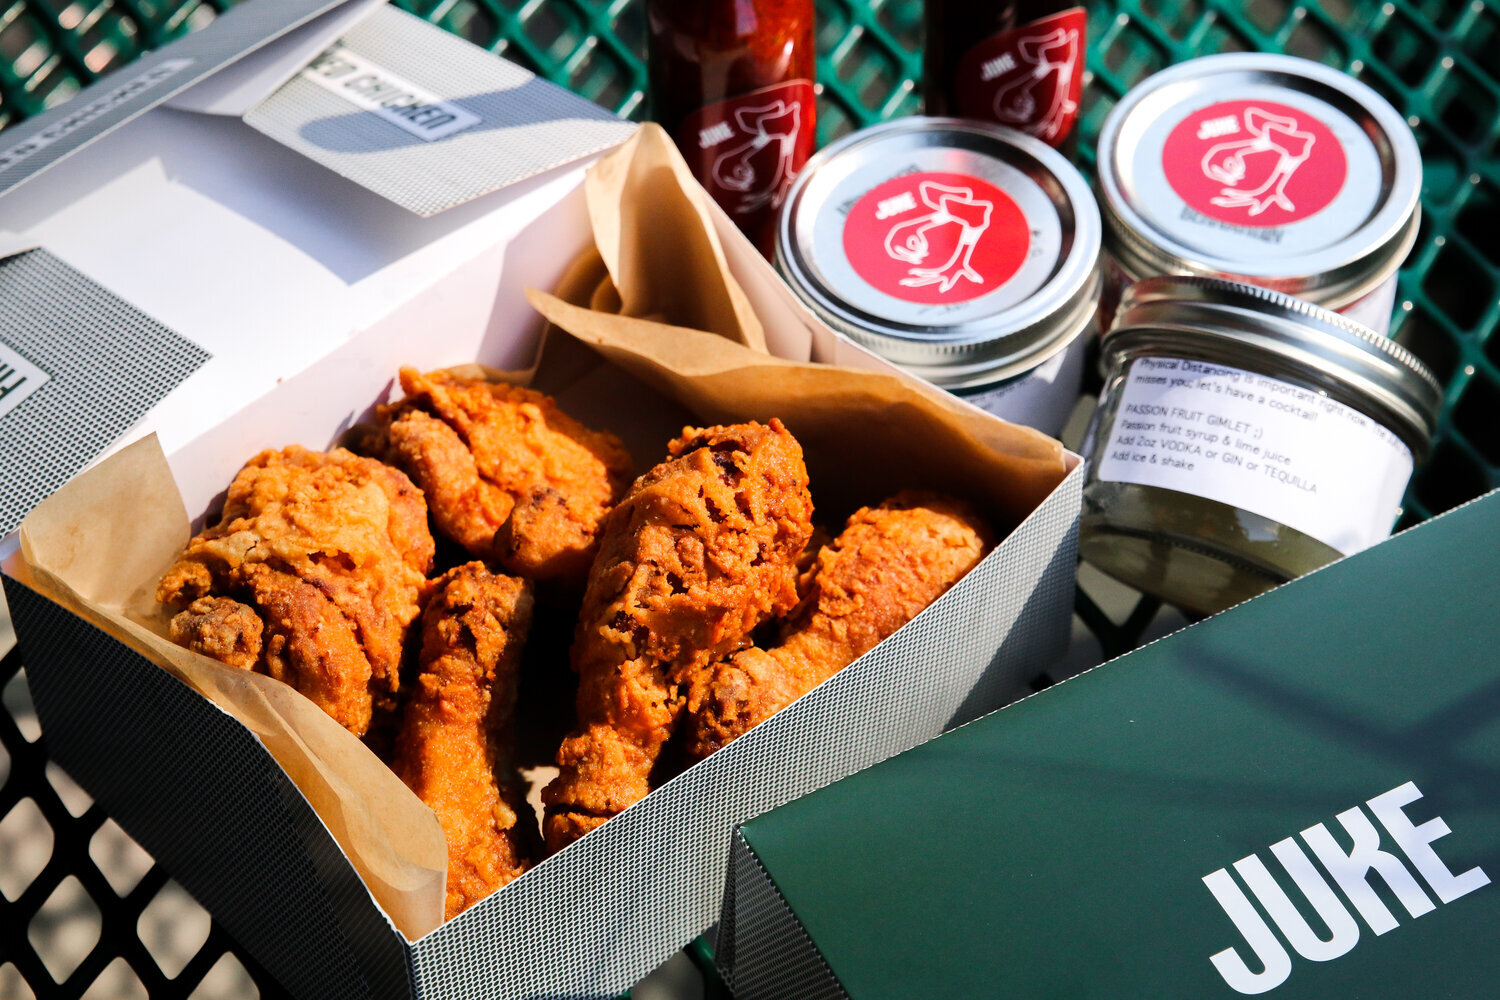  Juke Fried Chicken is one of the original participants in the Breaking Bread campaign, which is a grassroots movement to support Vancouver restaurants and the hospitality industry. Breaking Bread required a strategy that included website development